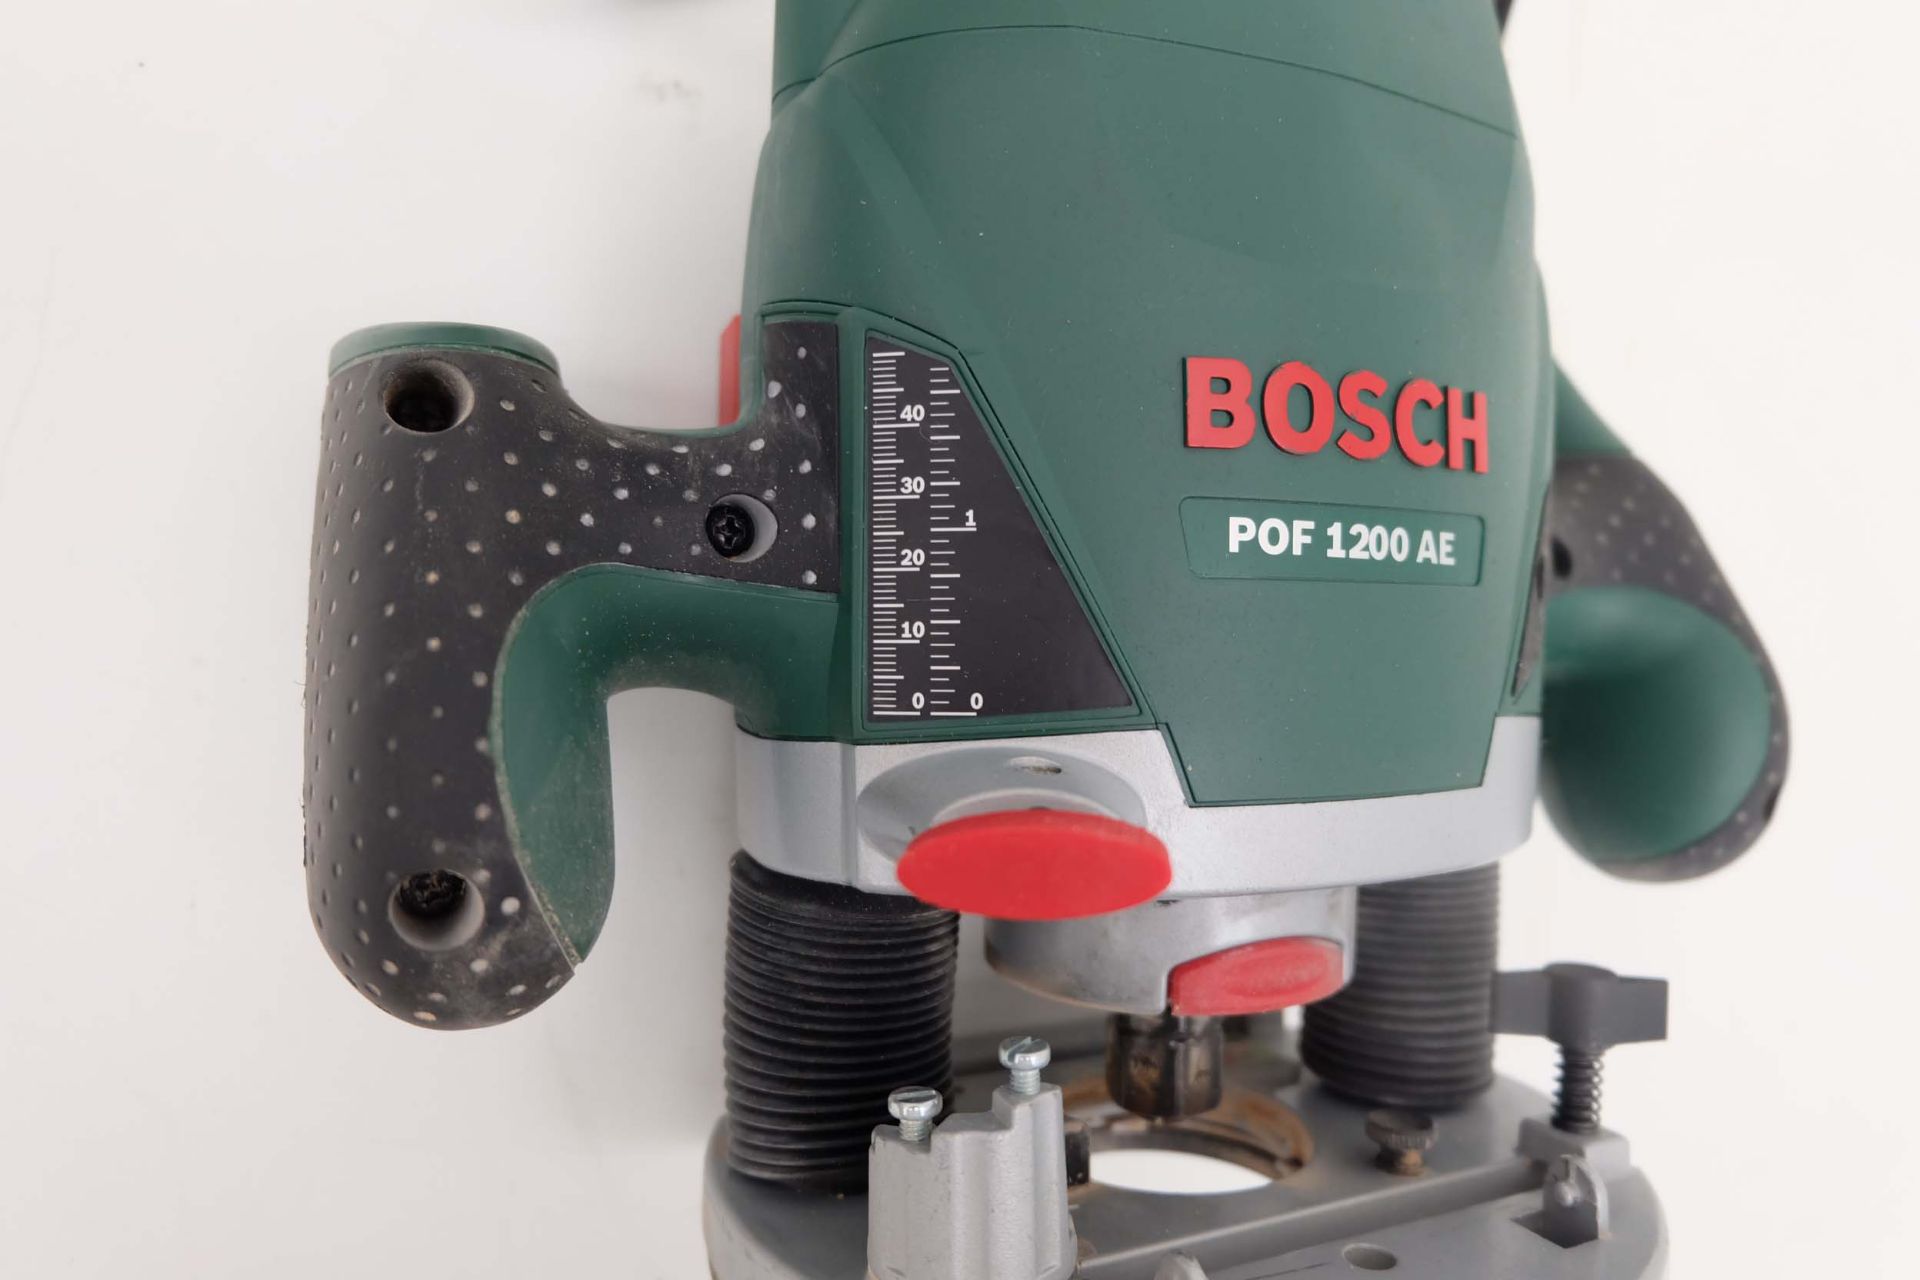 Bosch POF1200AE Electronic Plunging Router. 230V,1200W Motor. With Box of Bits. - Image 6 of 9